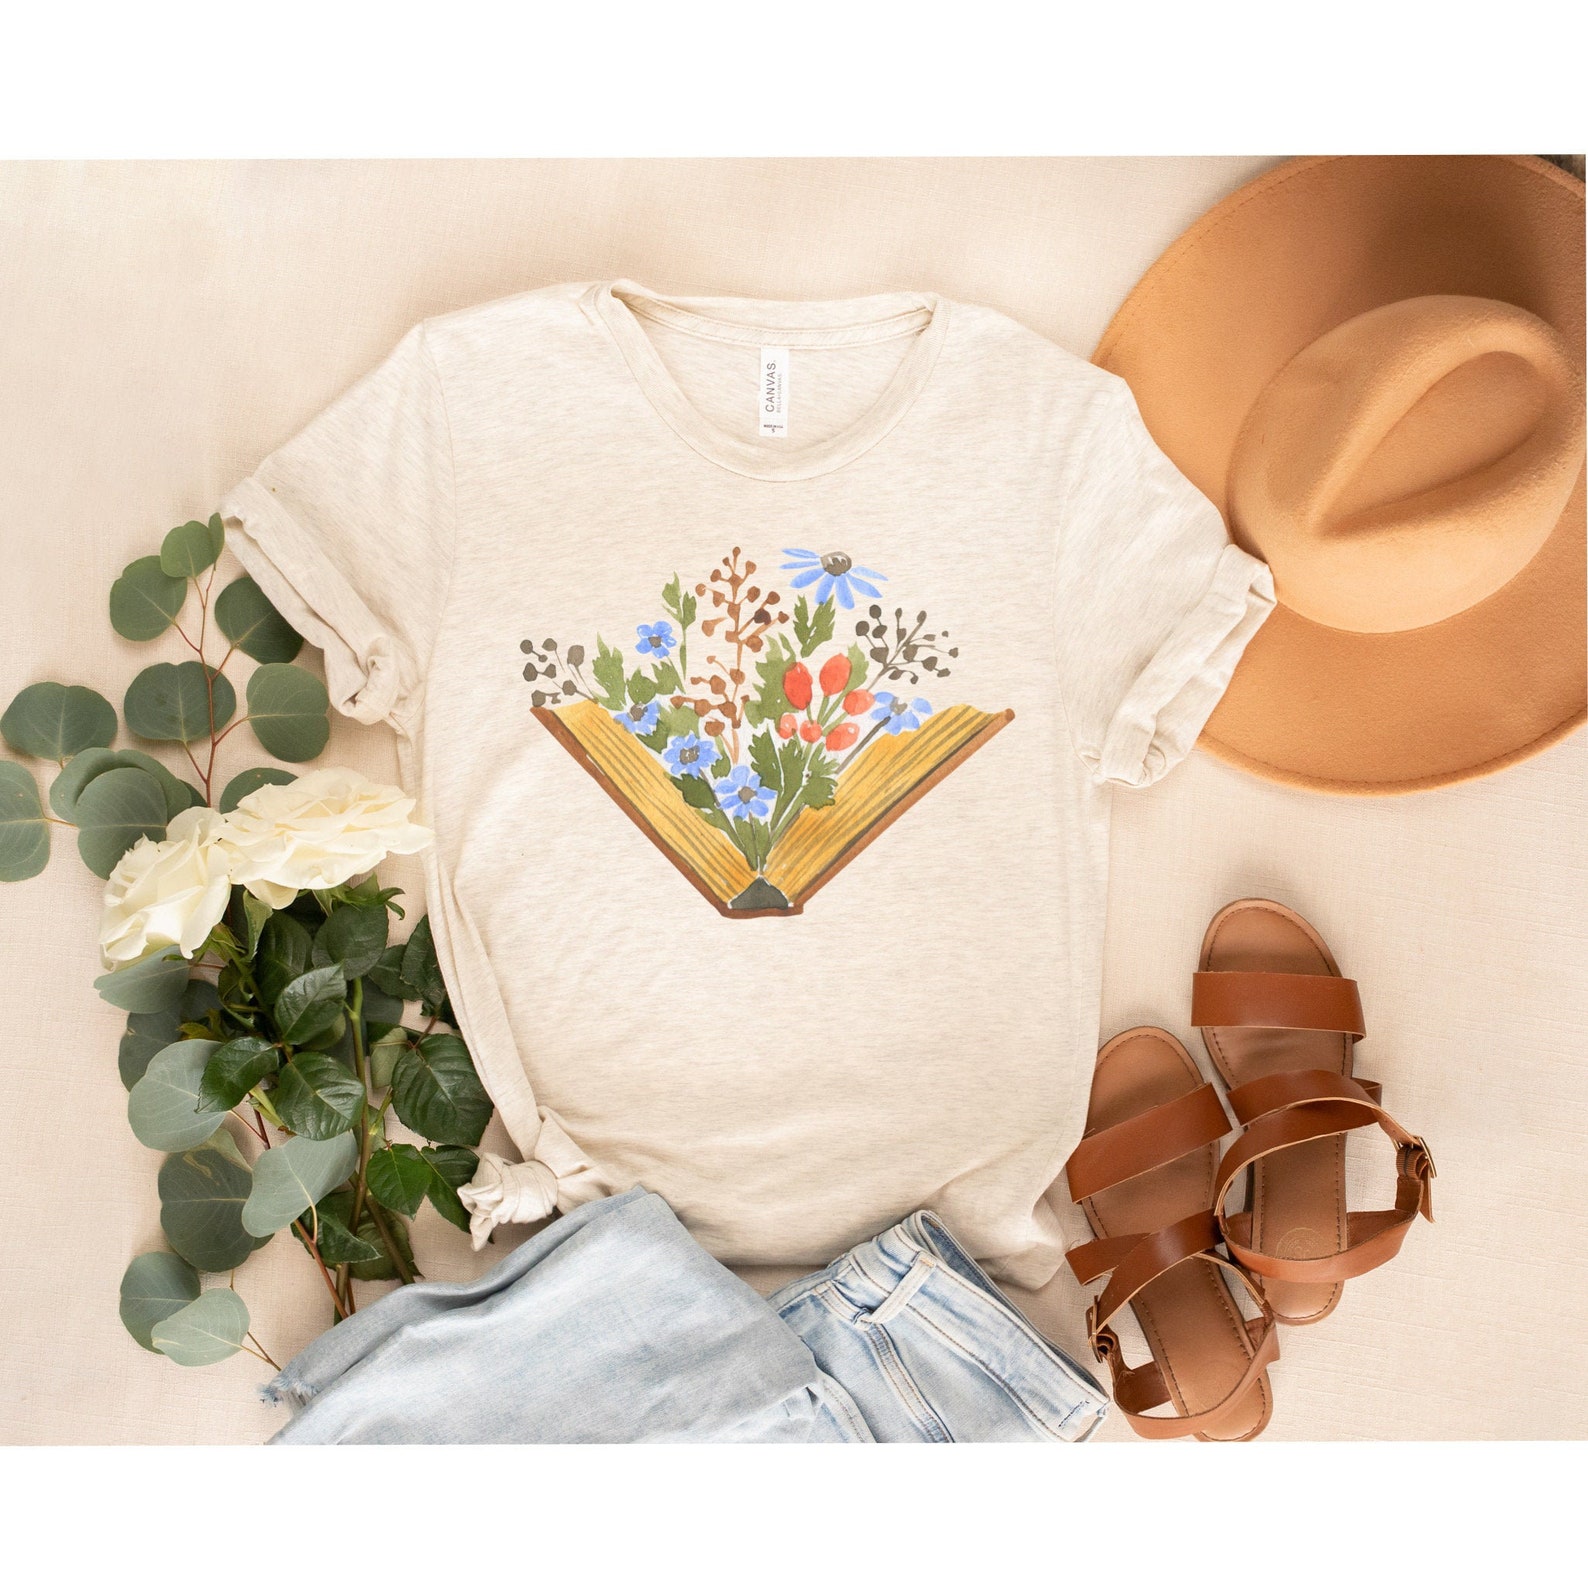 A cream t-shirt depicting an open book with florals springing from the pages